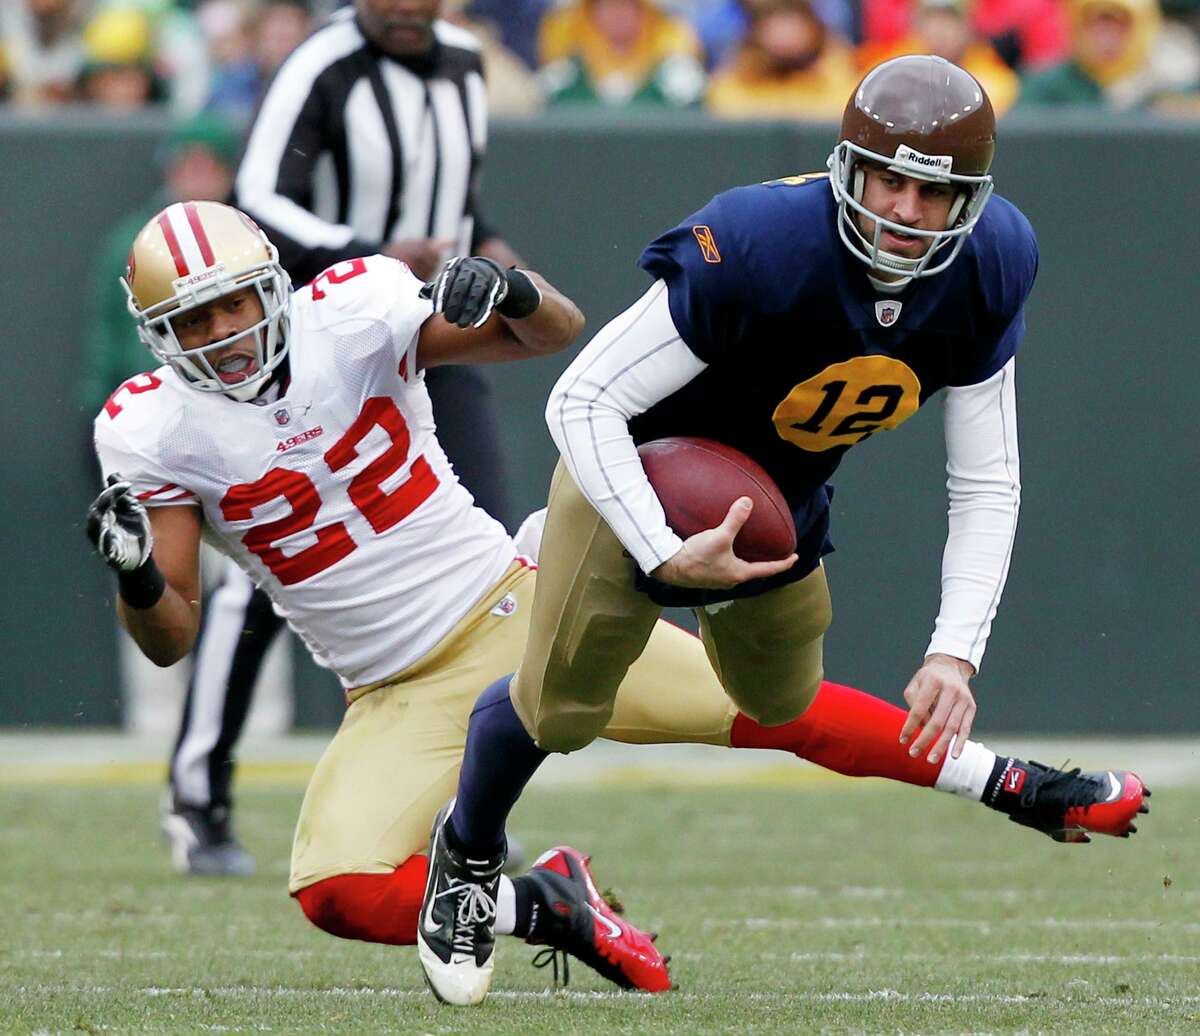 Green Bay Packers quarterback Aaron Rodgers (12) is tripped up by San Francisco 49ers cornerback Nate Clements (22) after a first down run during the second half of an NFL football game Sunday, Dec. 5, 2010, in Green Bay, Wis. The Packers won 34-16. (AP Photo/Jeffrey Phelps)